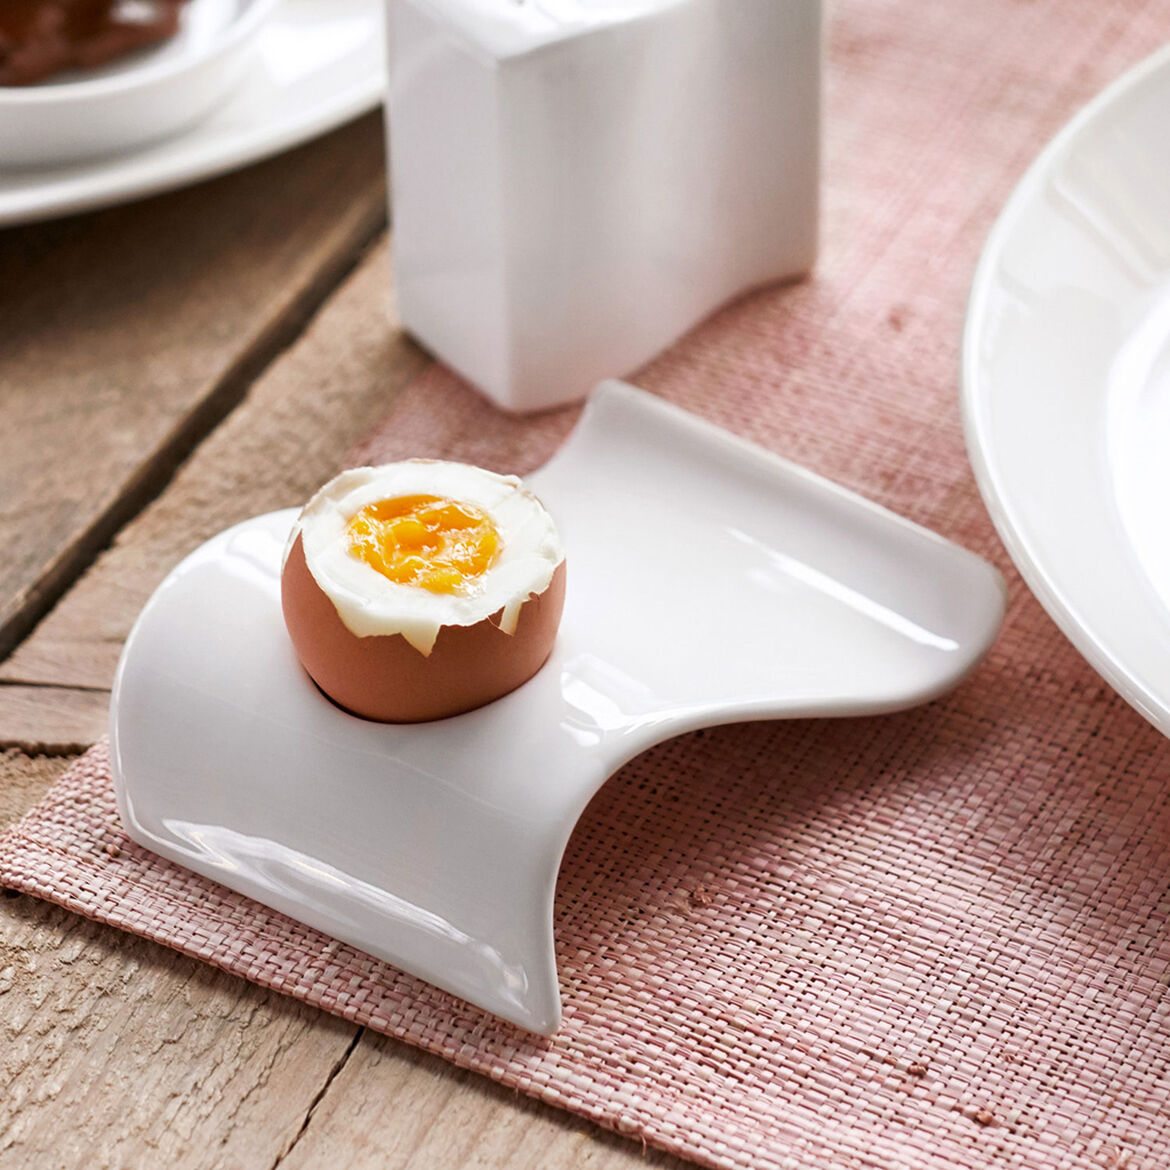 NEWWAVE EGG CUP